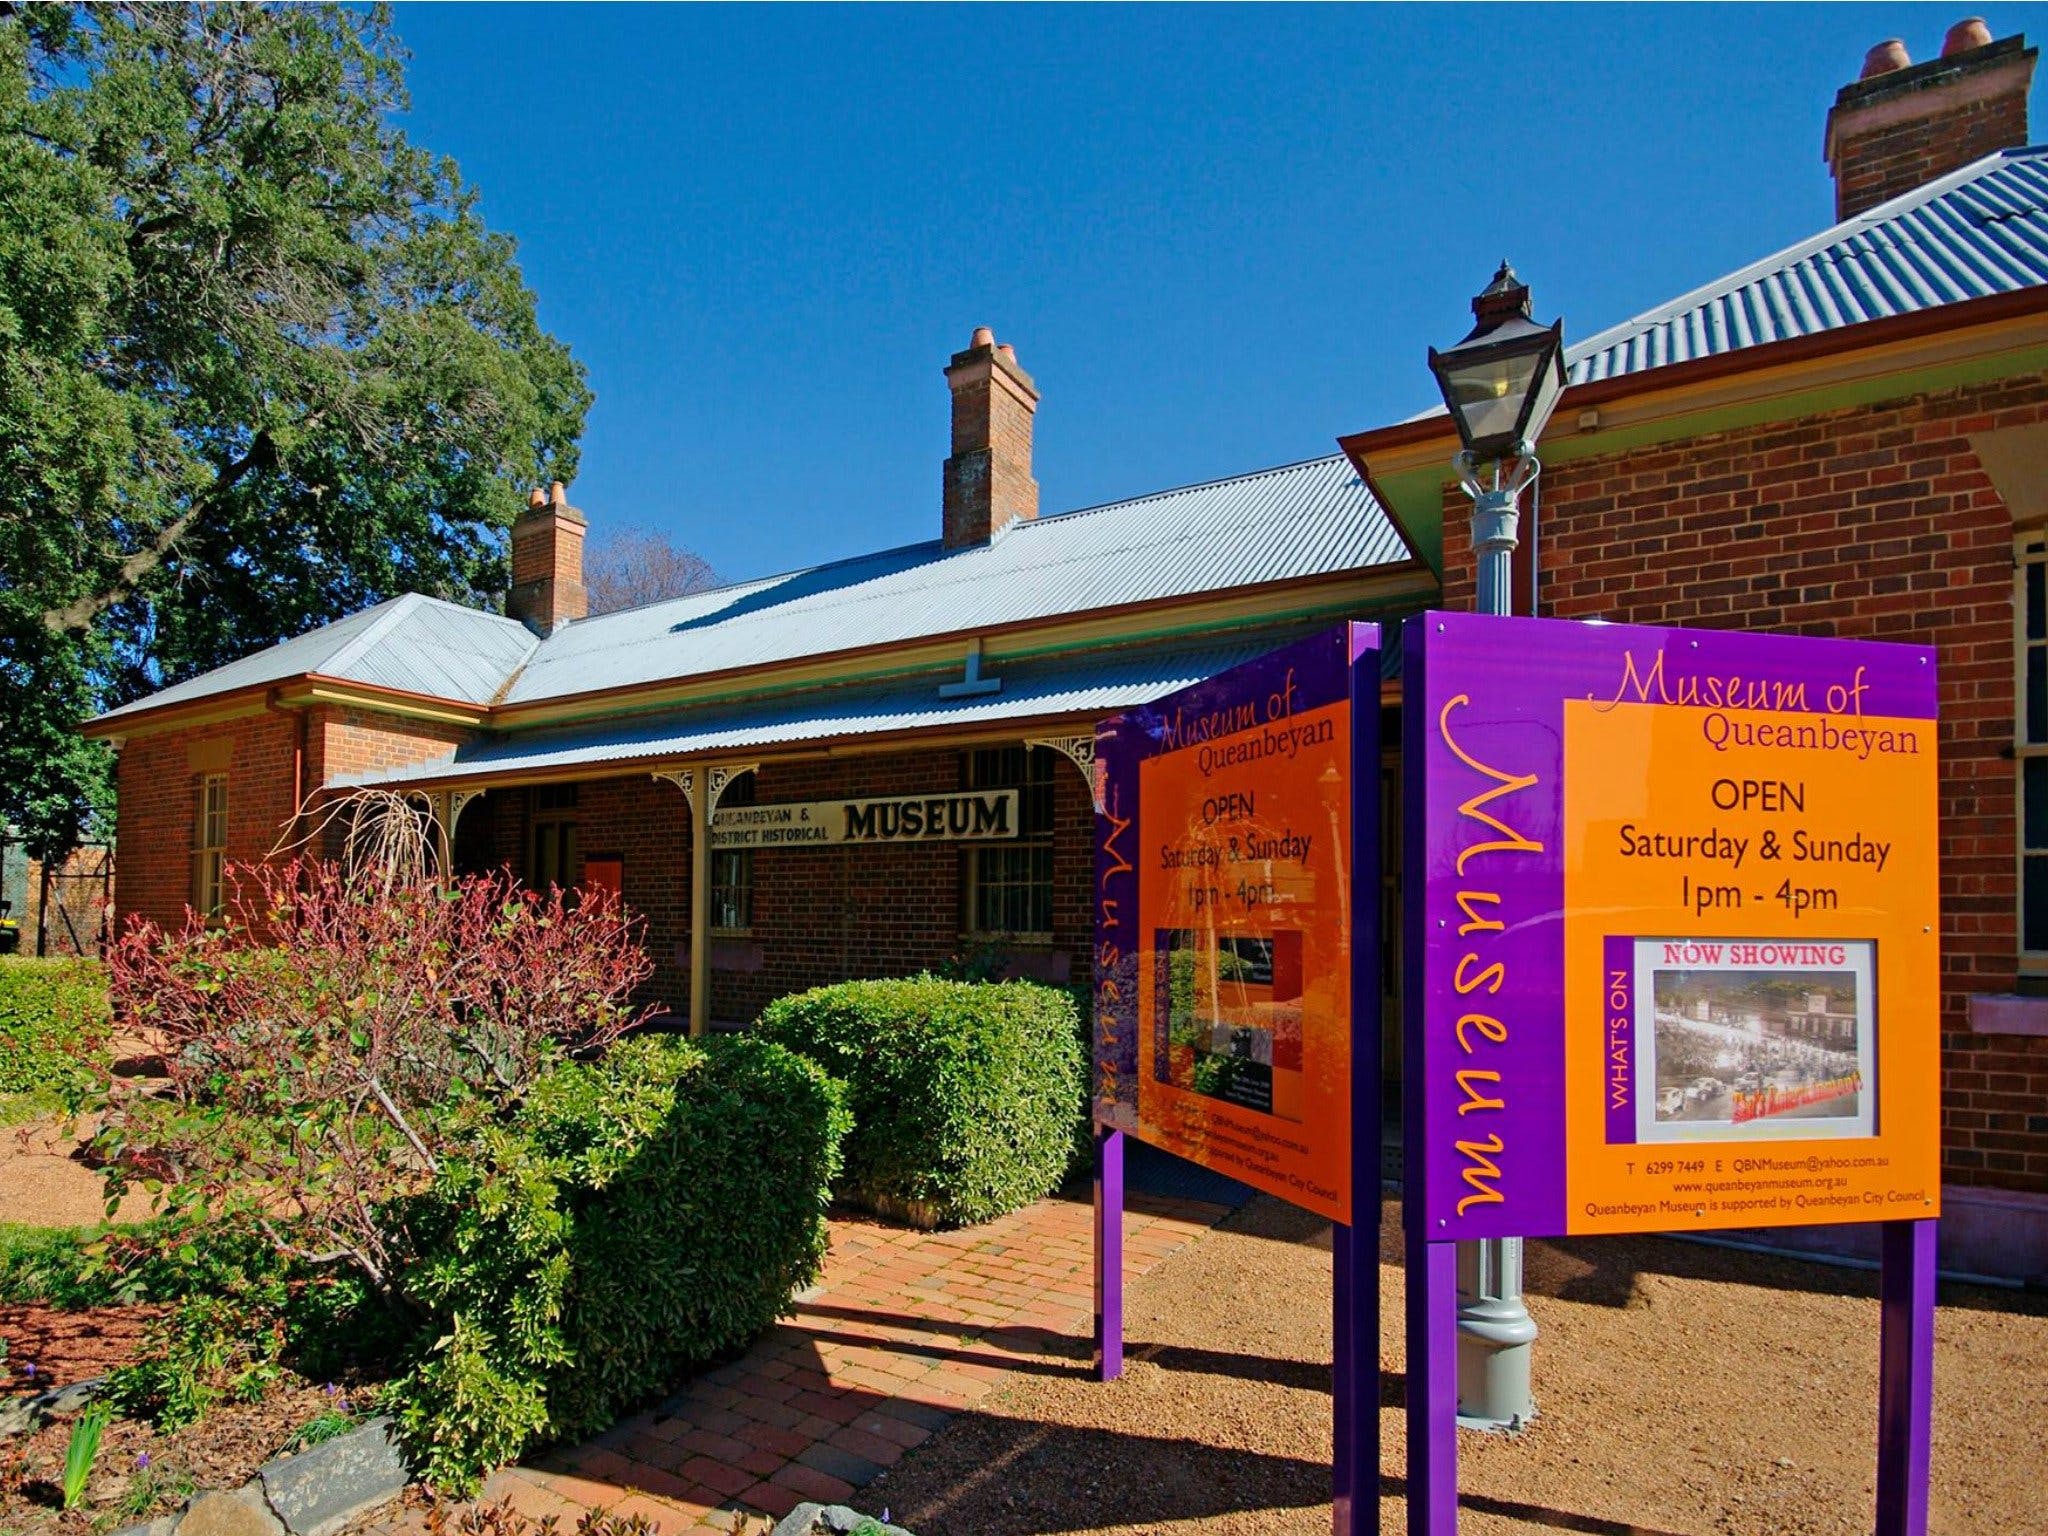 Queanbeyan Museum - Accommodation Nelson Bay